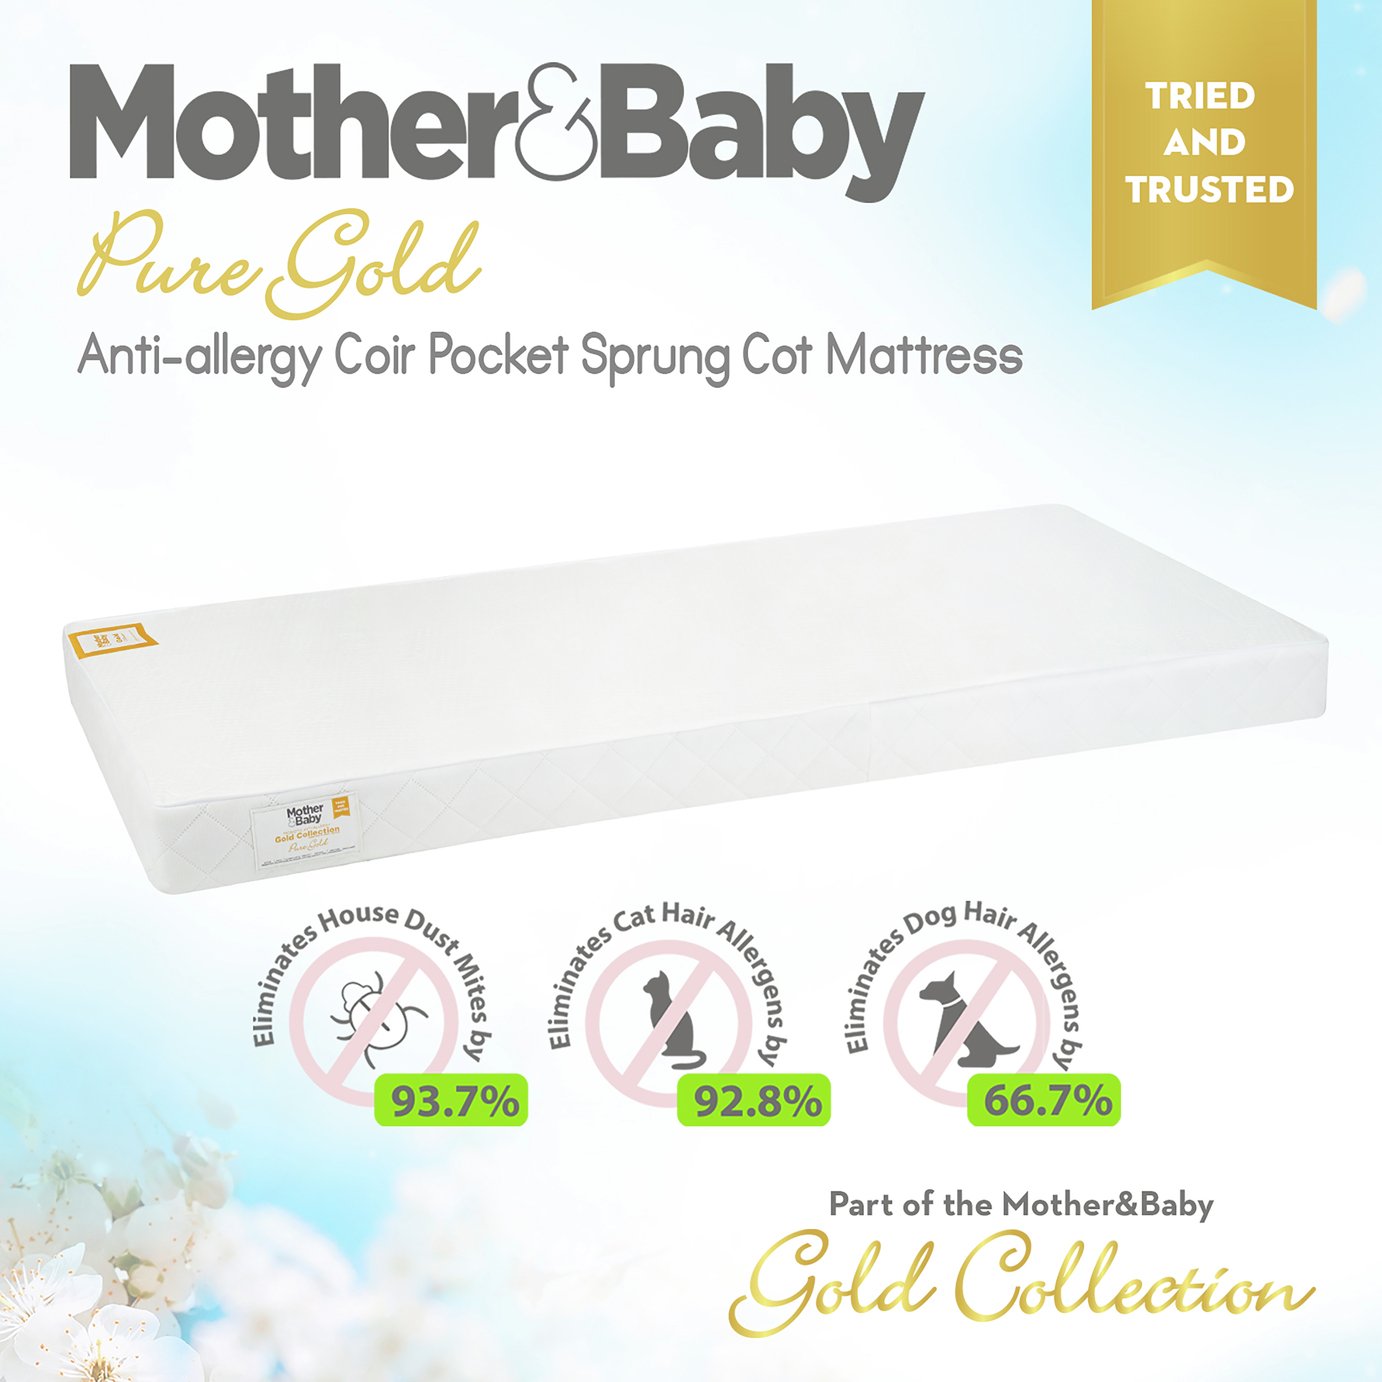 Mother&Baby 120 x 60cm Anti-Allergy Pocket Cot Mattress Review